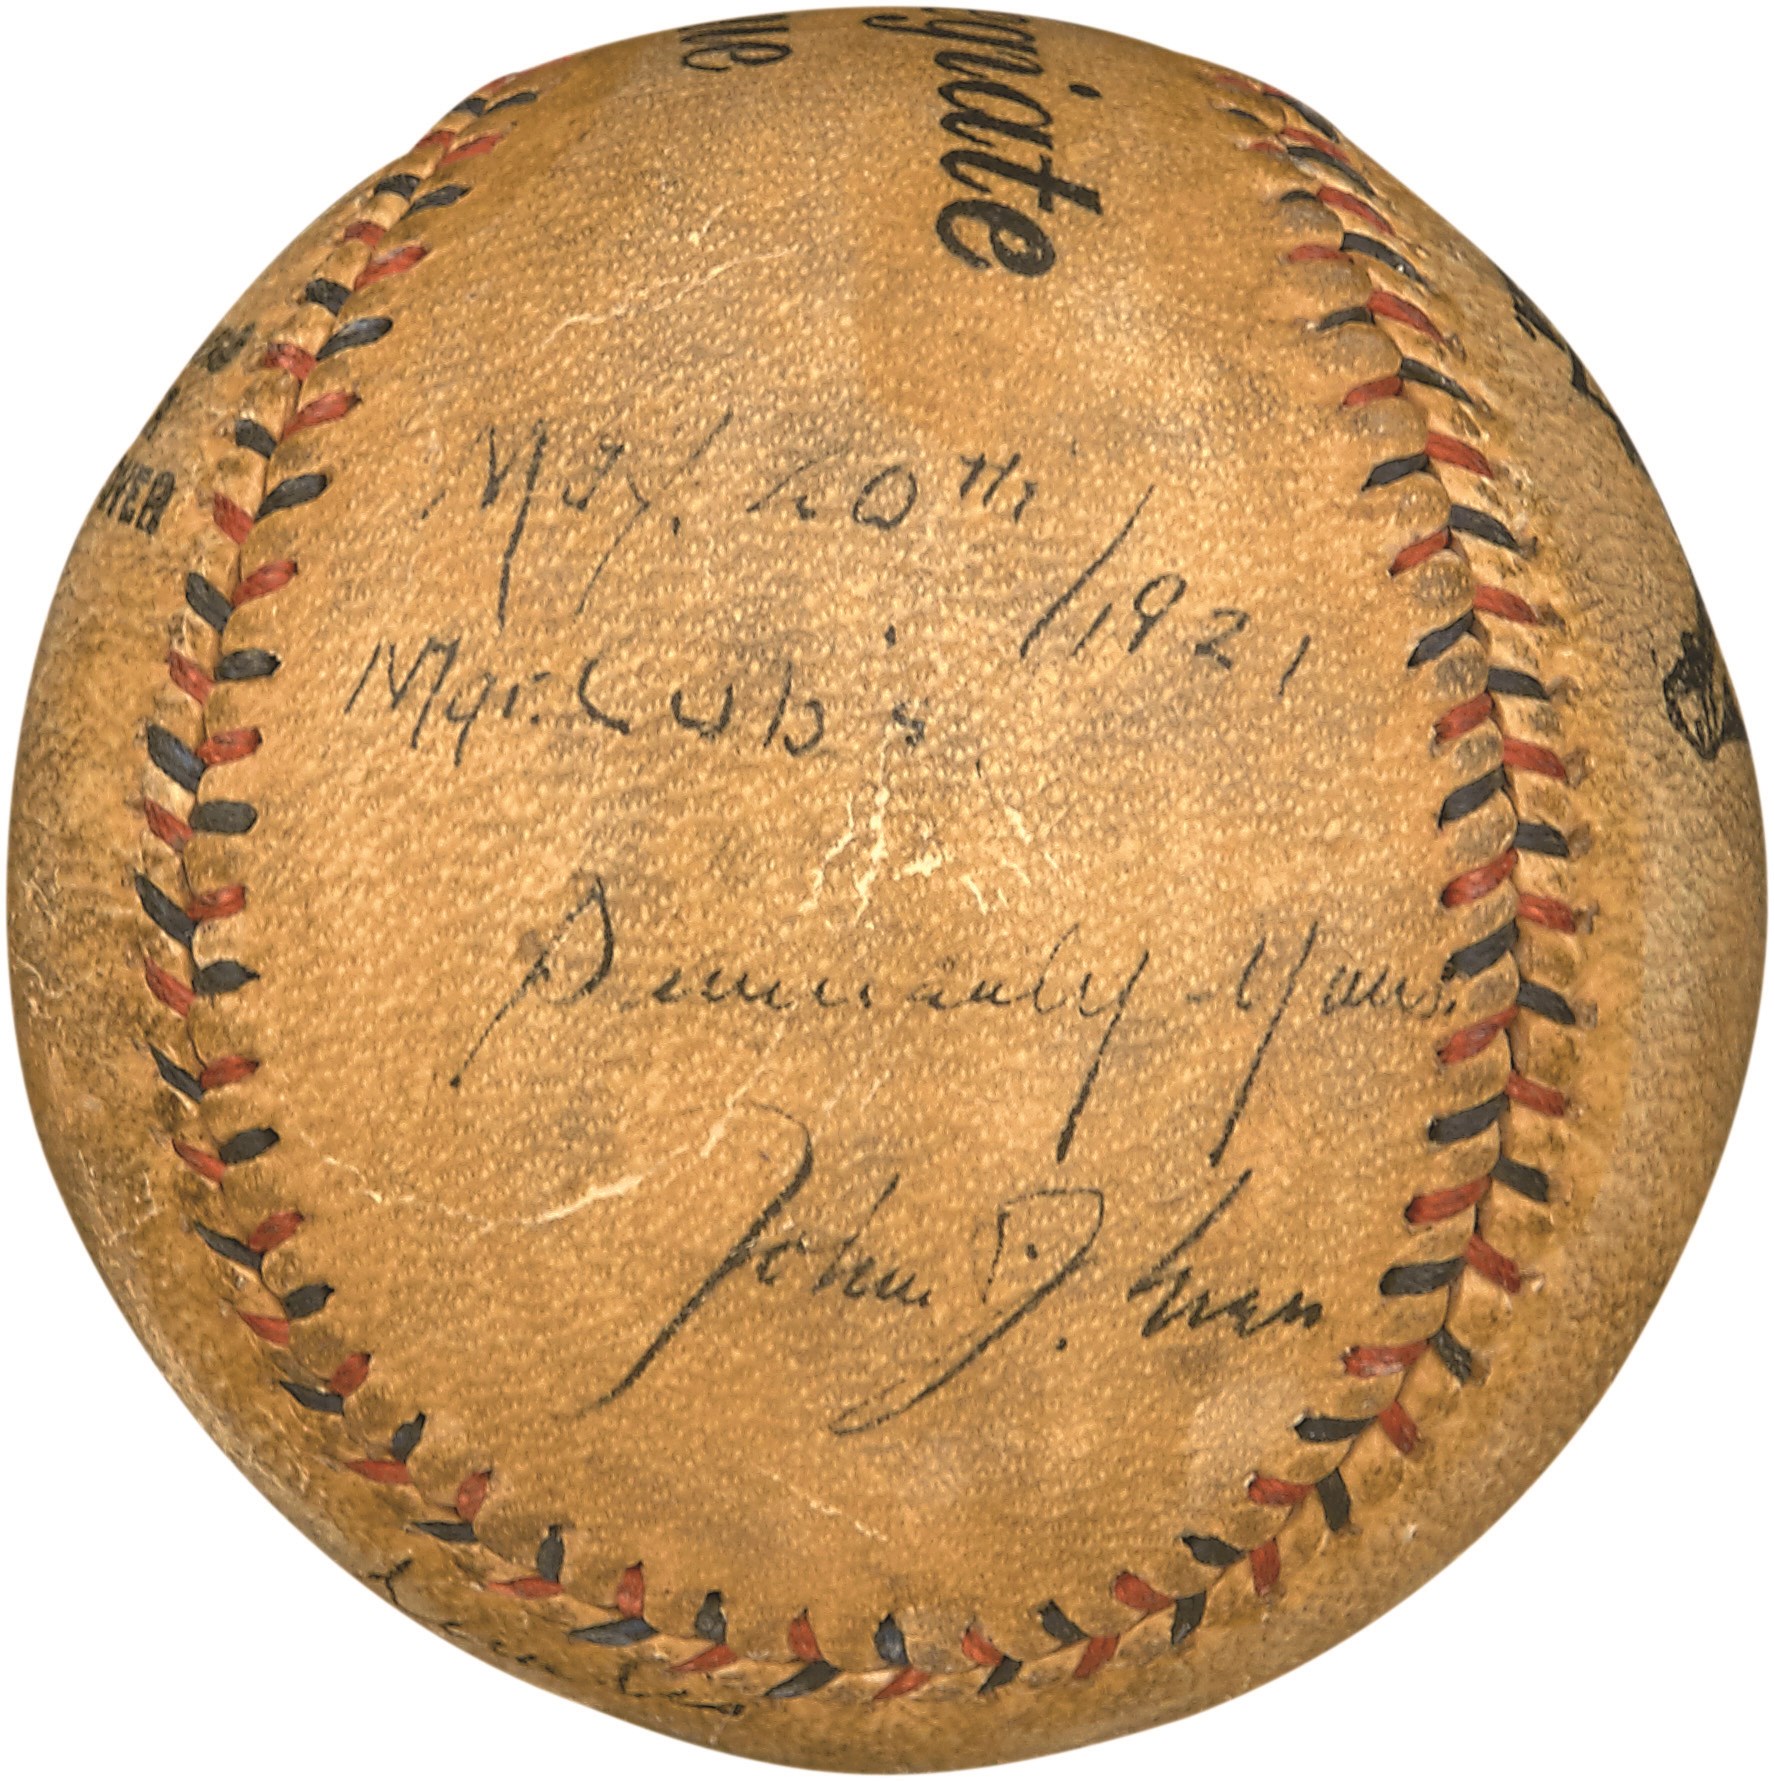 Baseball Autographs - 1921 Johnny Evers Signed Baseball - Displays as a Single! (Evers Family Letter, PSA)